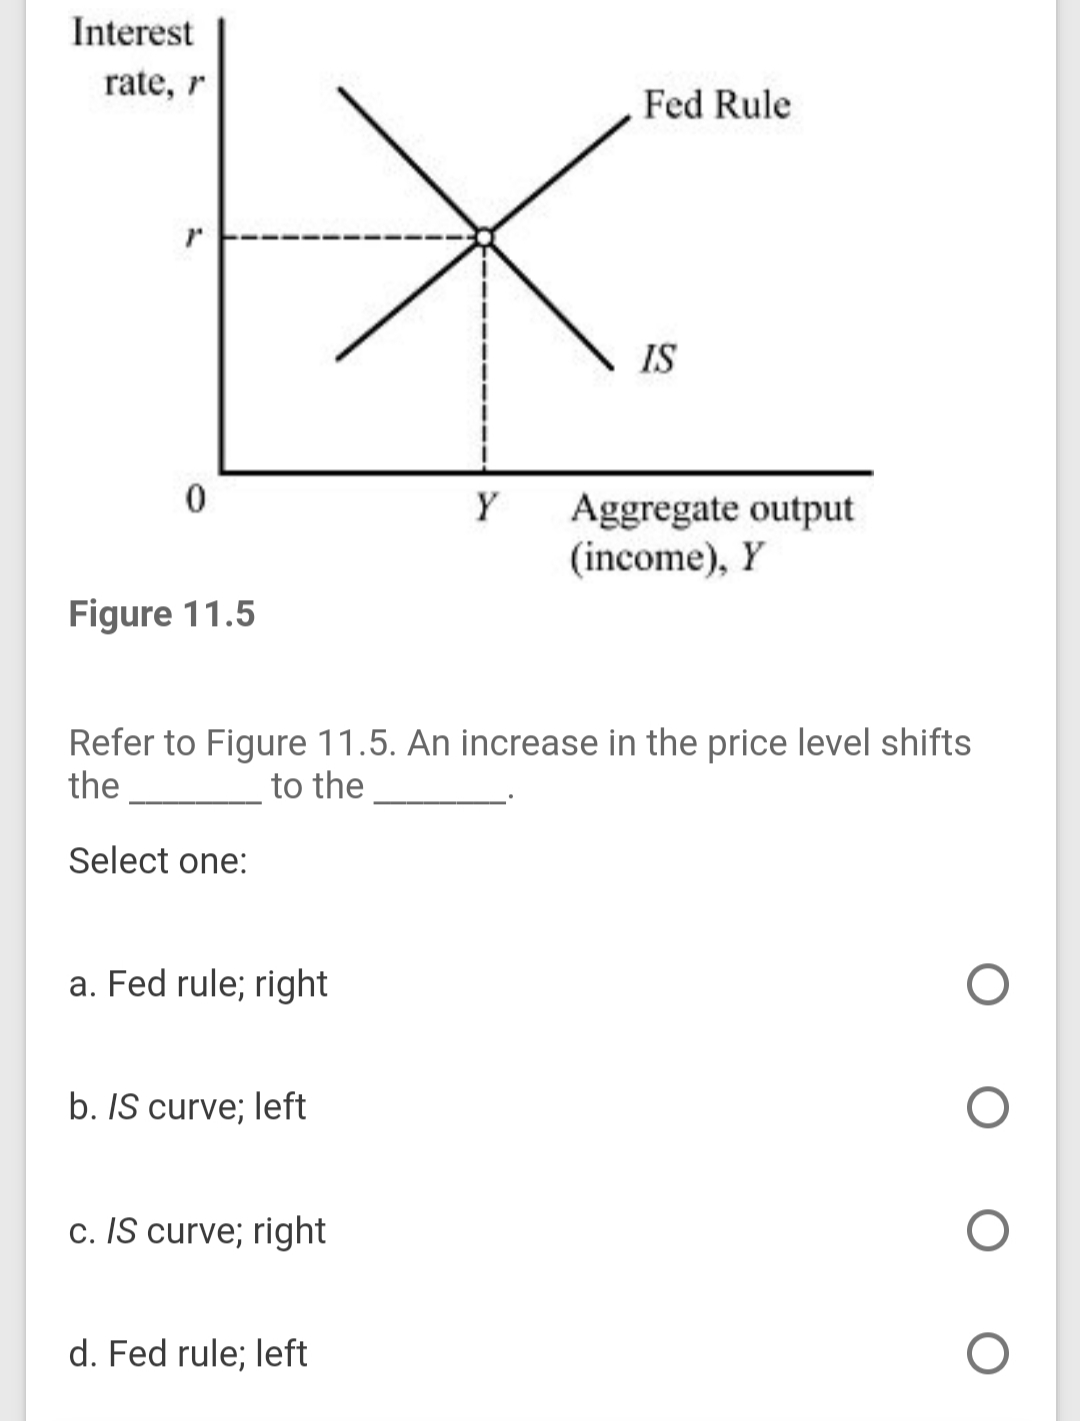 Interest
rate, r
Fed Rule
IS
Y
Aggregate output
(income), Y
Figure 11.5
Refer to Figure 11.5. An increase in the price level shifts
the
to the
Select one:
a. Fed rule; right
b. IS curve; left
c. IS curve; right
d. Fed rule; left
